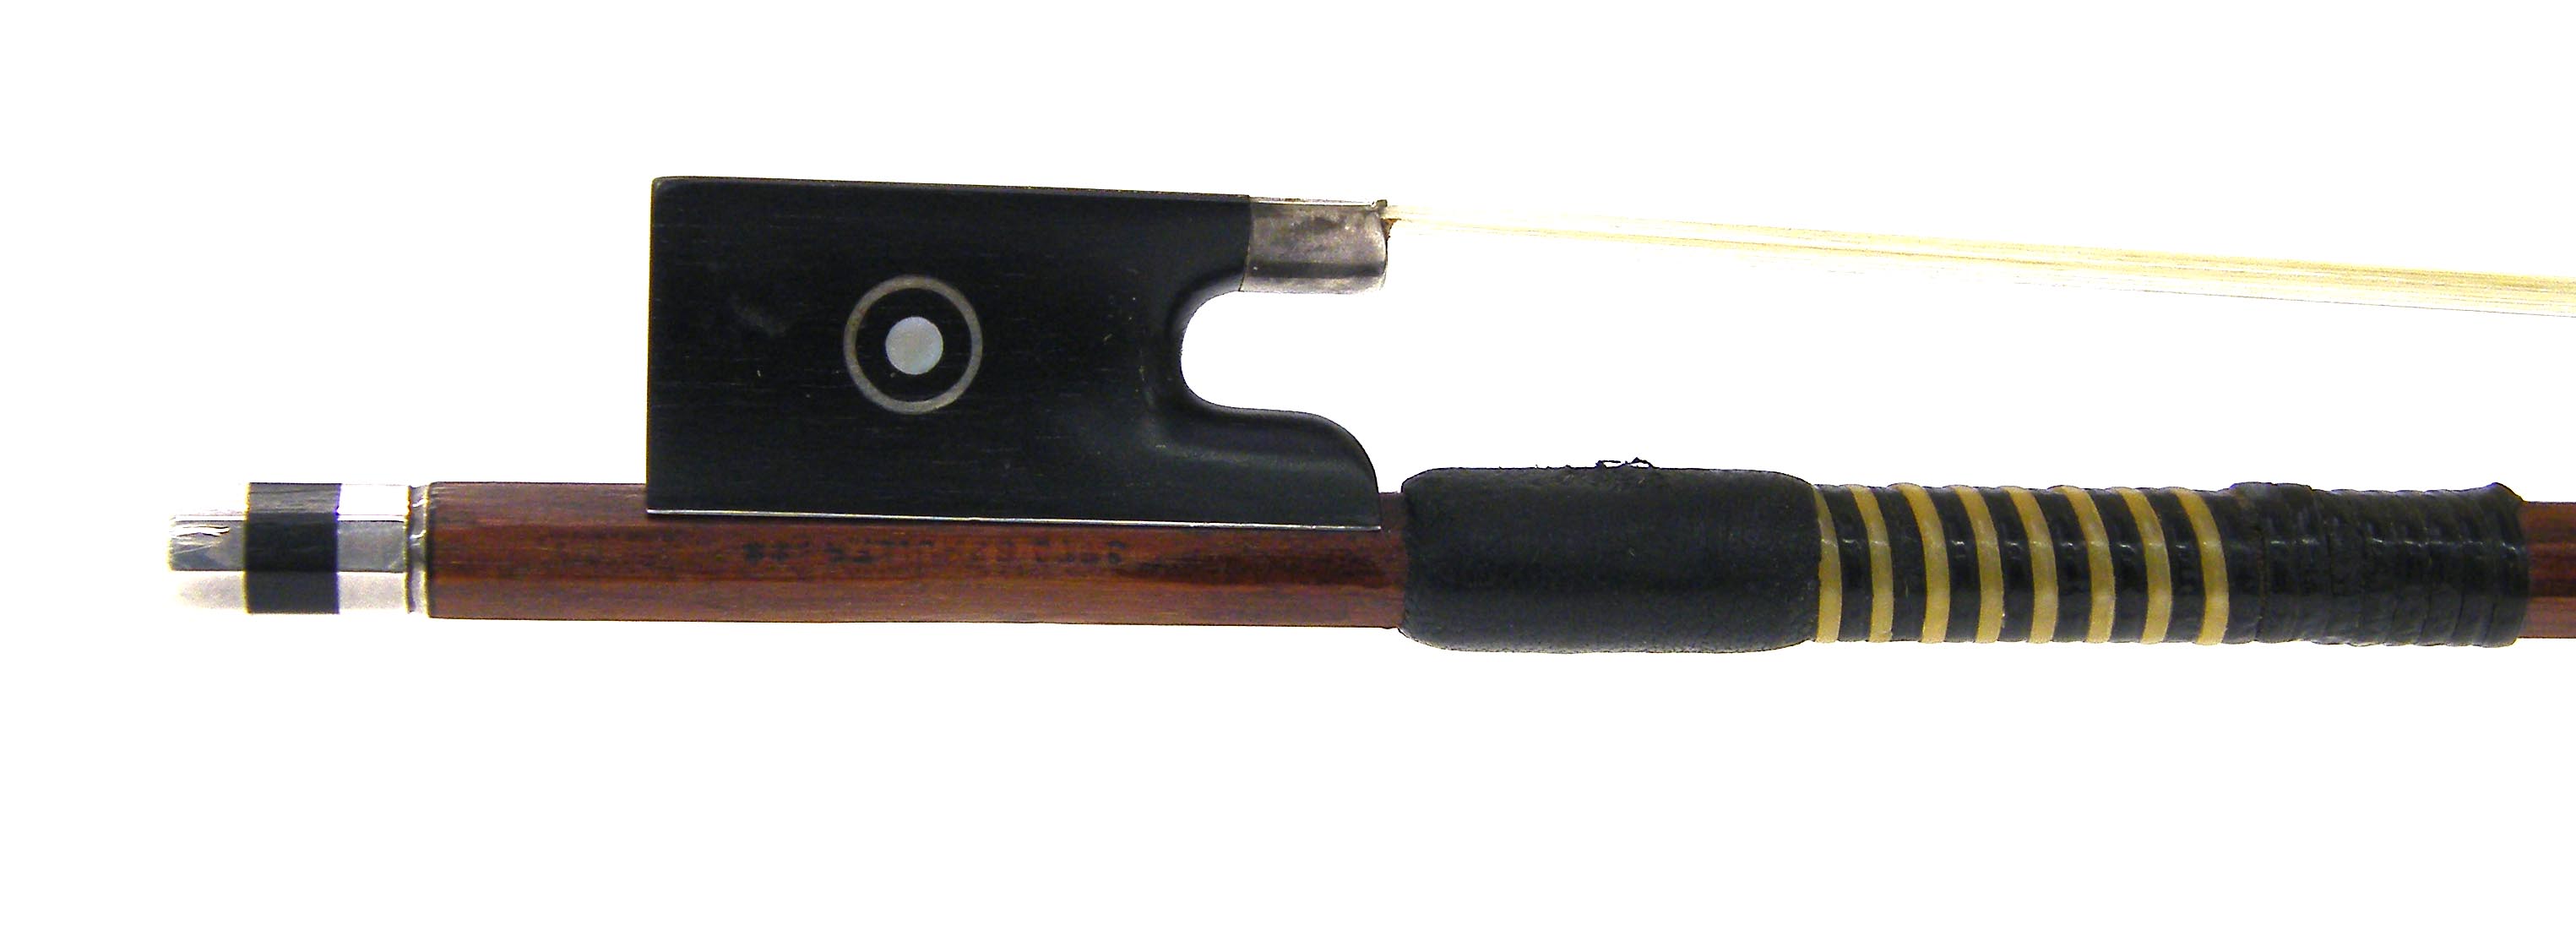 German silver mounted violin bow by and stamped Otto Dorfler**, the stick octagonal, the ebony